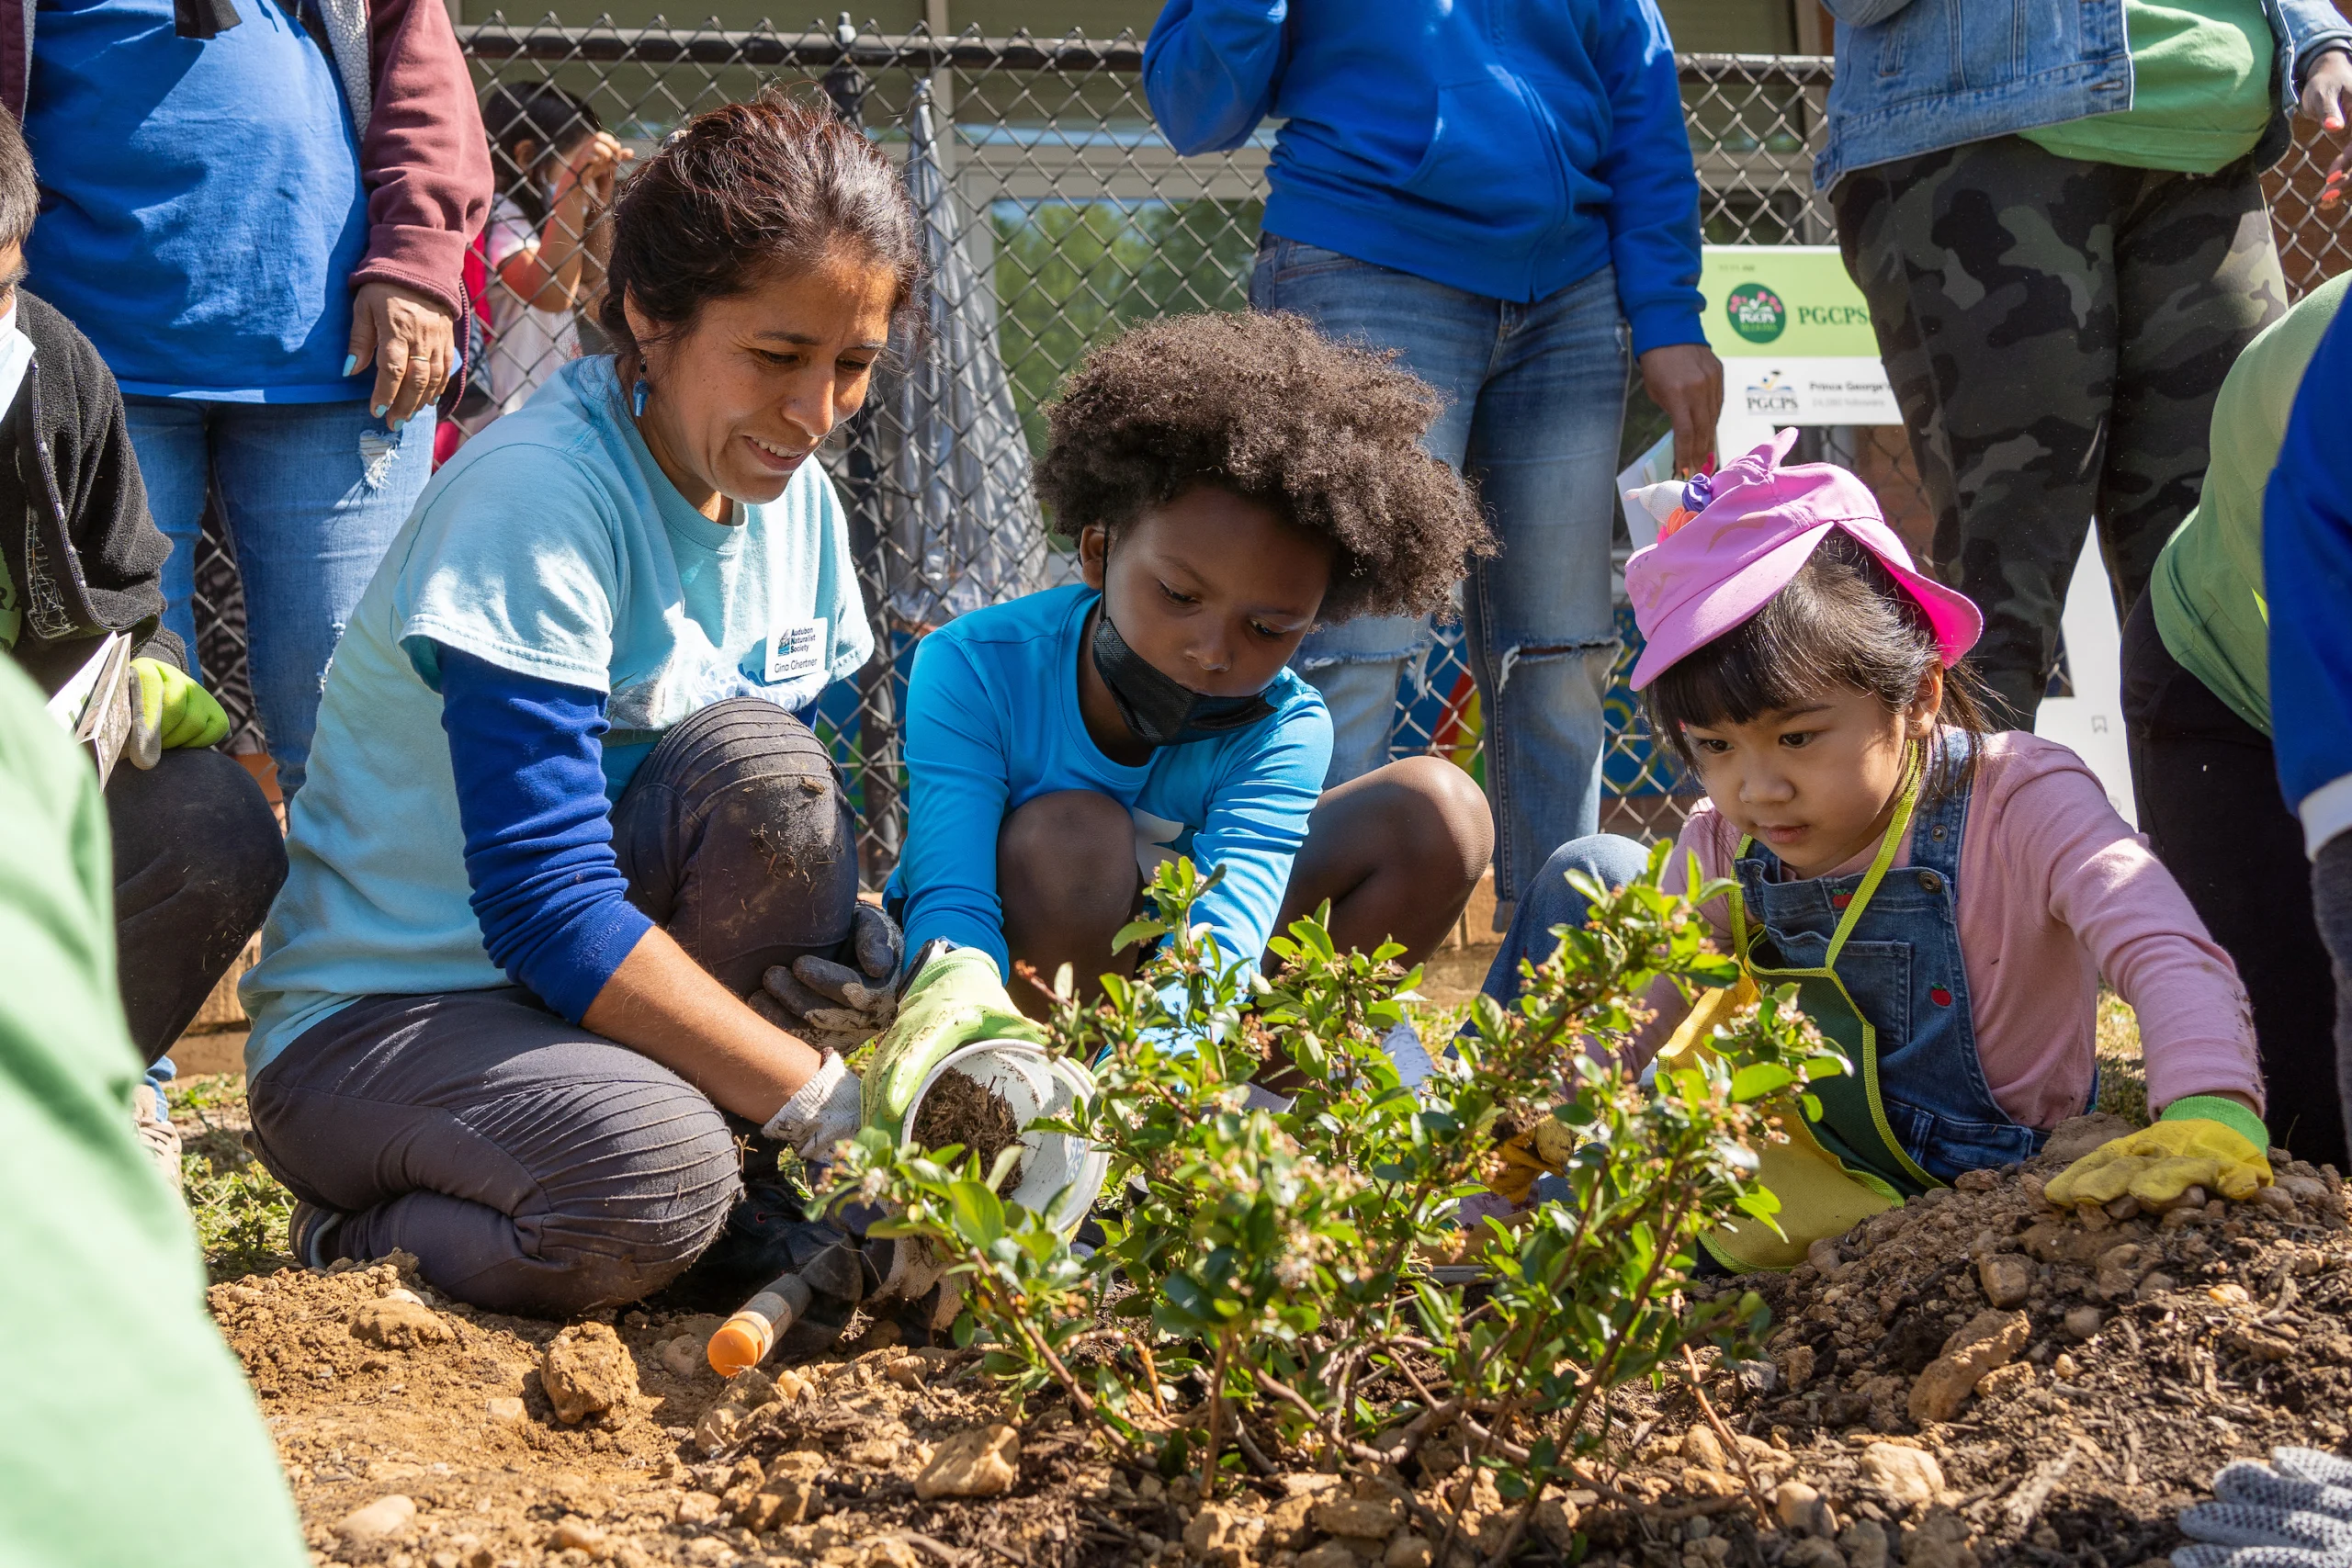 Children planting with adult guidance - Riverdale ES Earth Day 2022